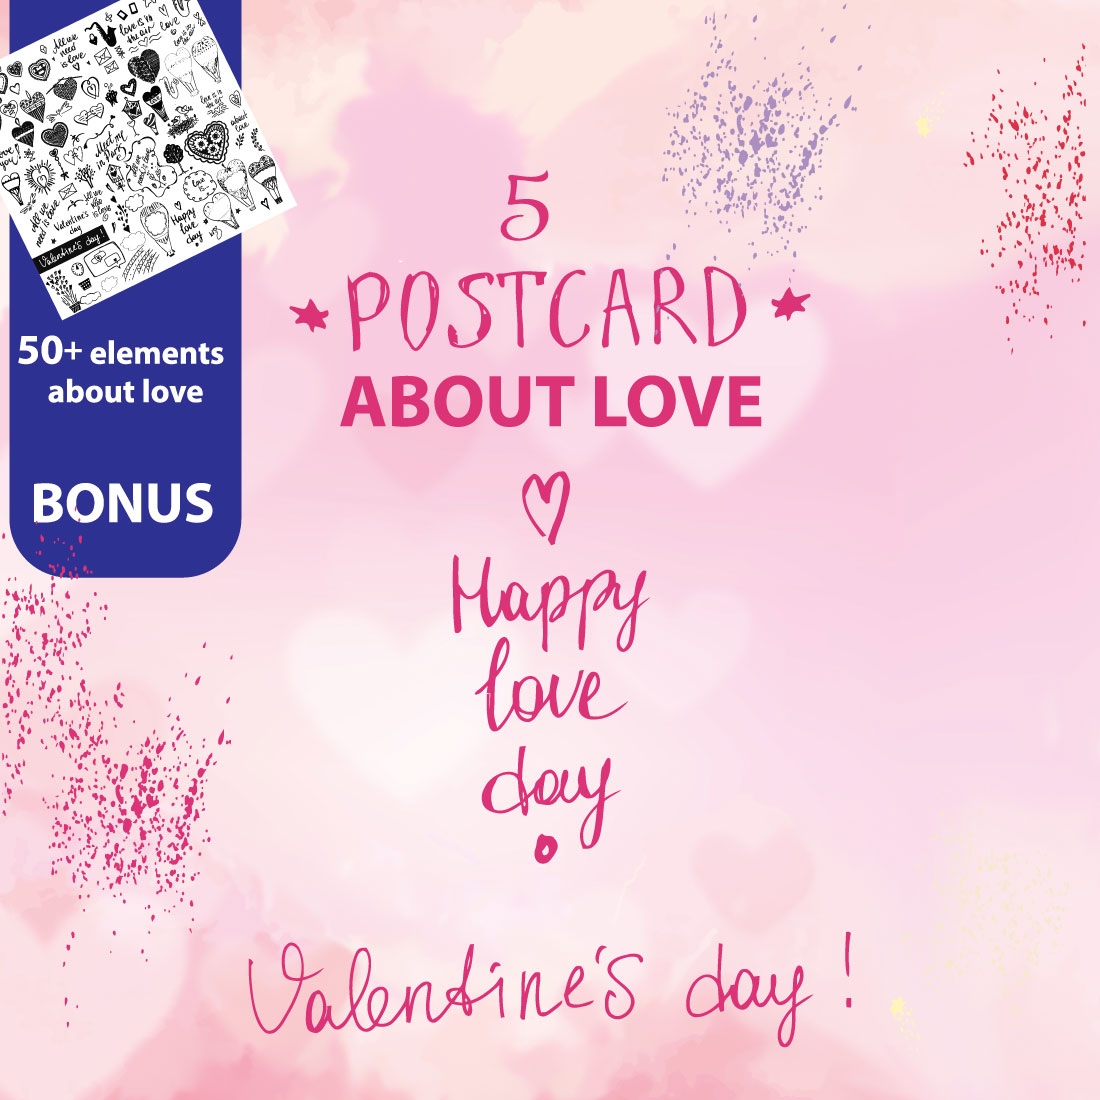 Valentines Day Poster – Happy Valentines Day Poster Greeting Card main cover.